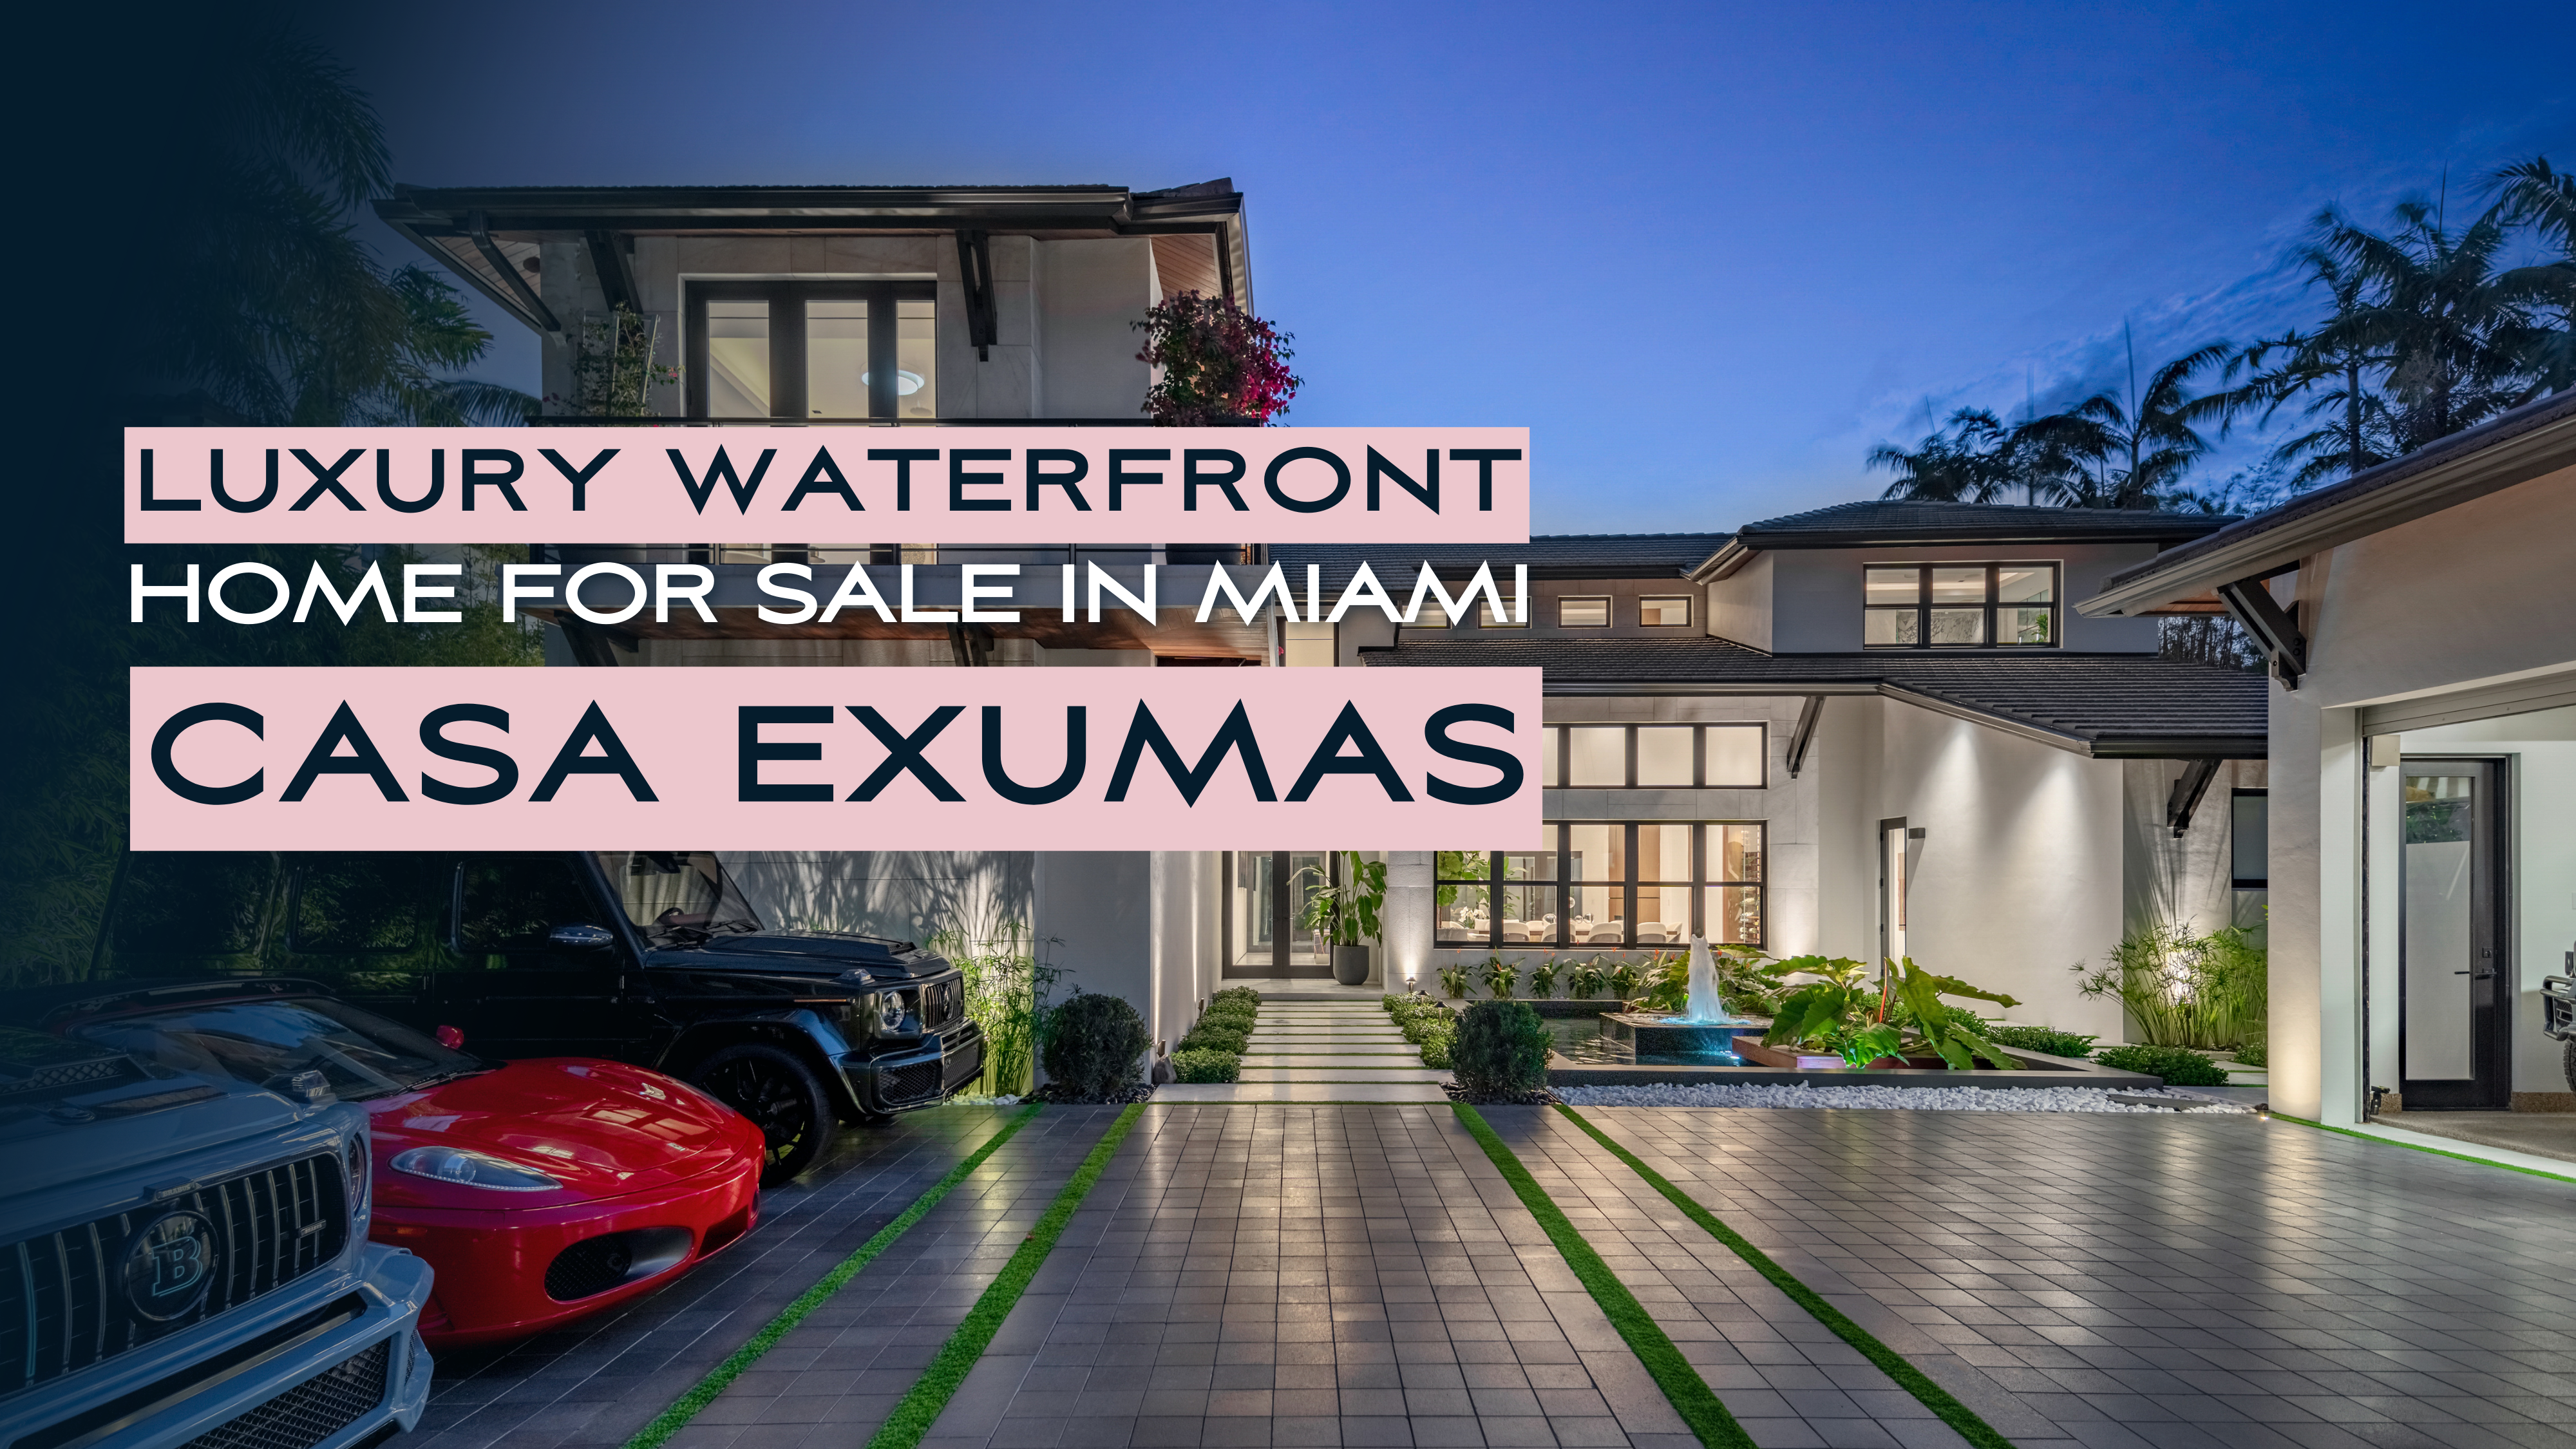 Luxury Waterfront Home for Sale in Miami: Casa Exumas in Miami’s Exclusive BayPoint Community – A Boater’s Dream